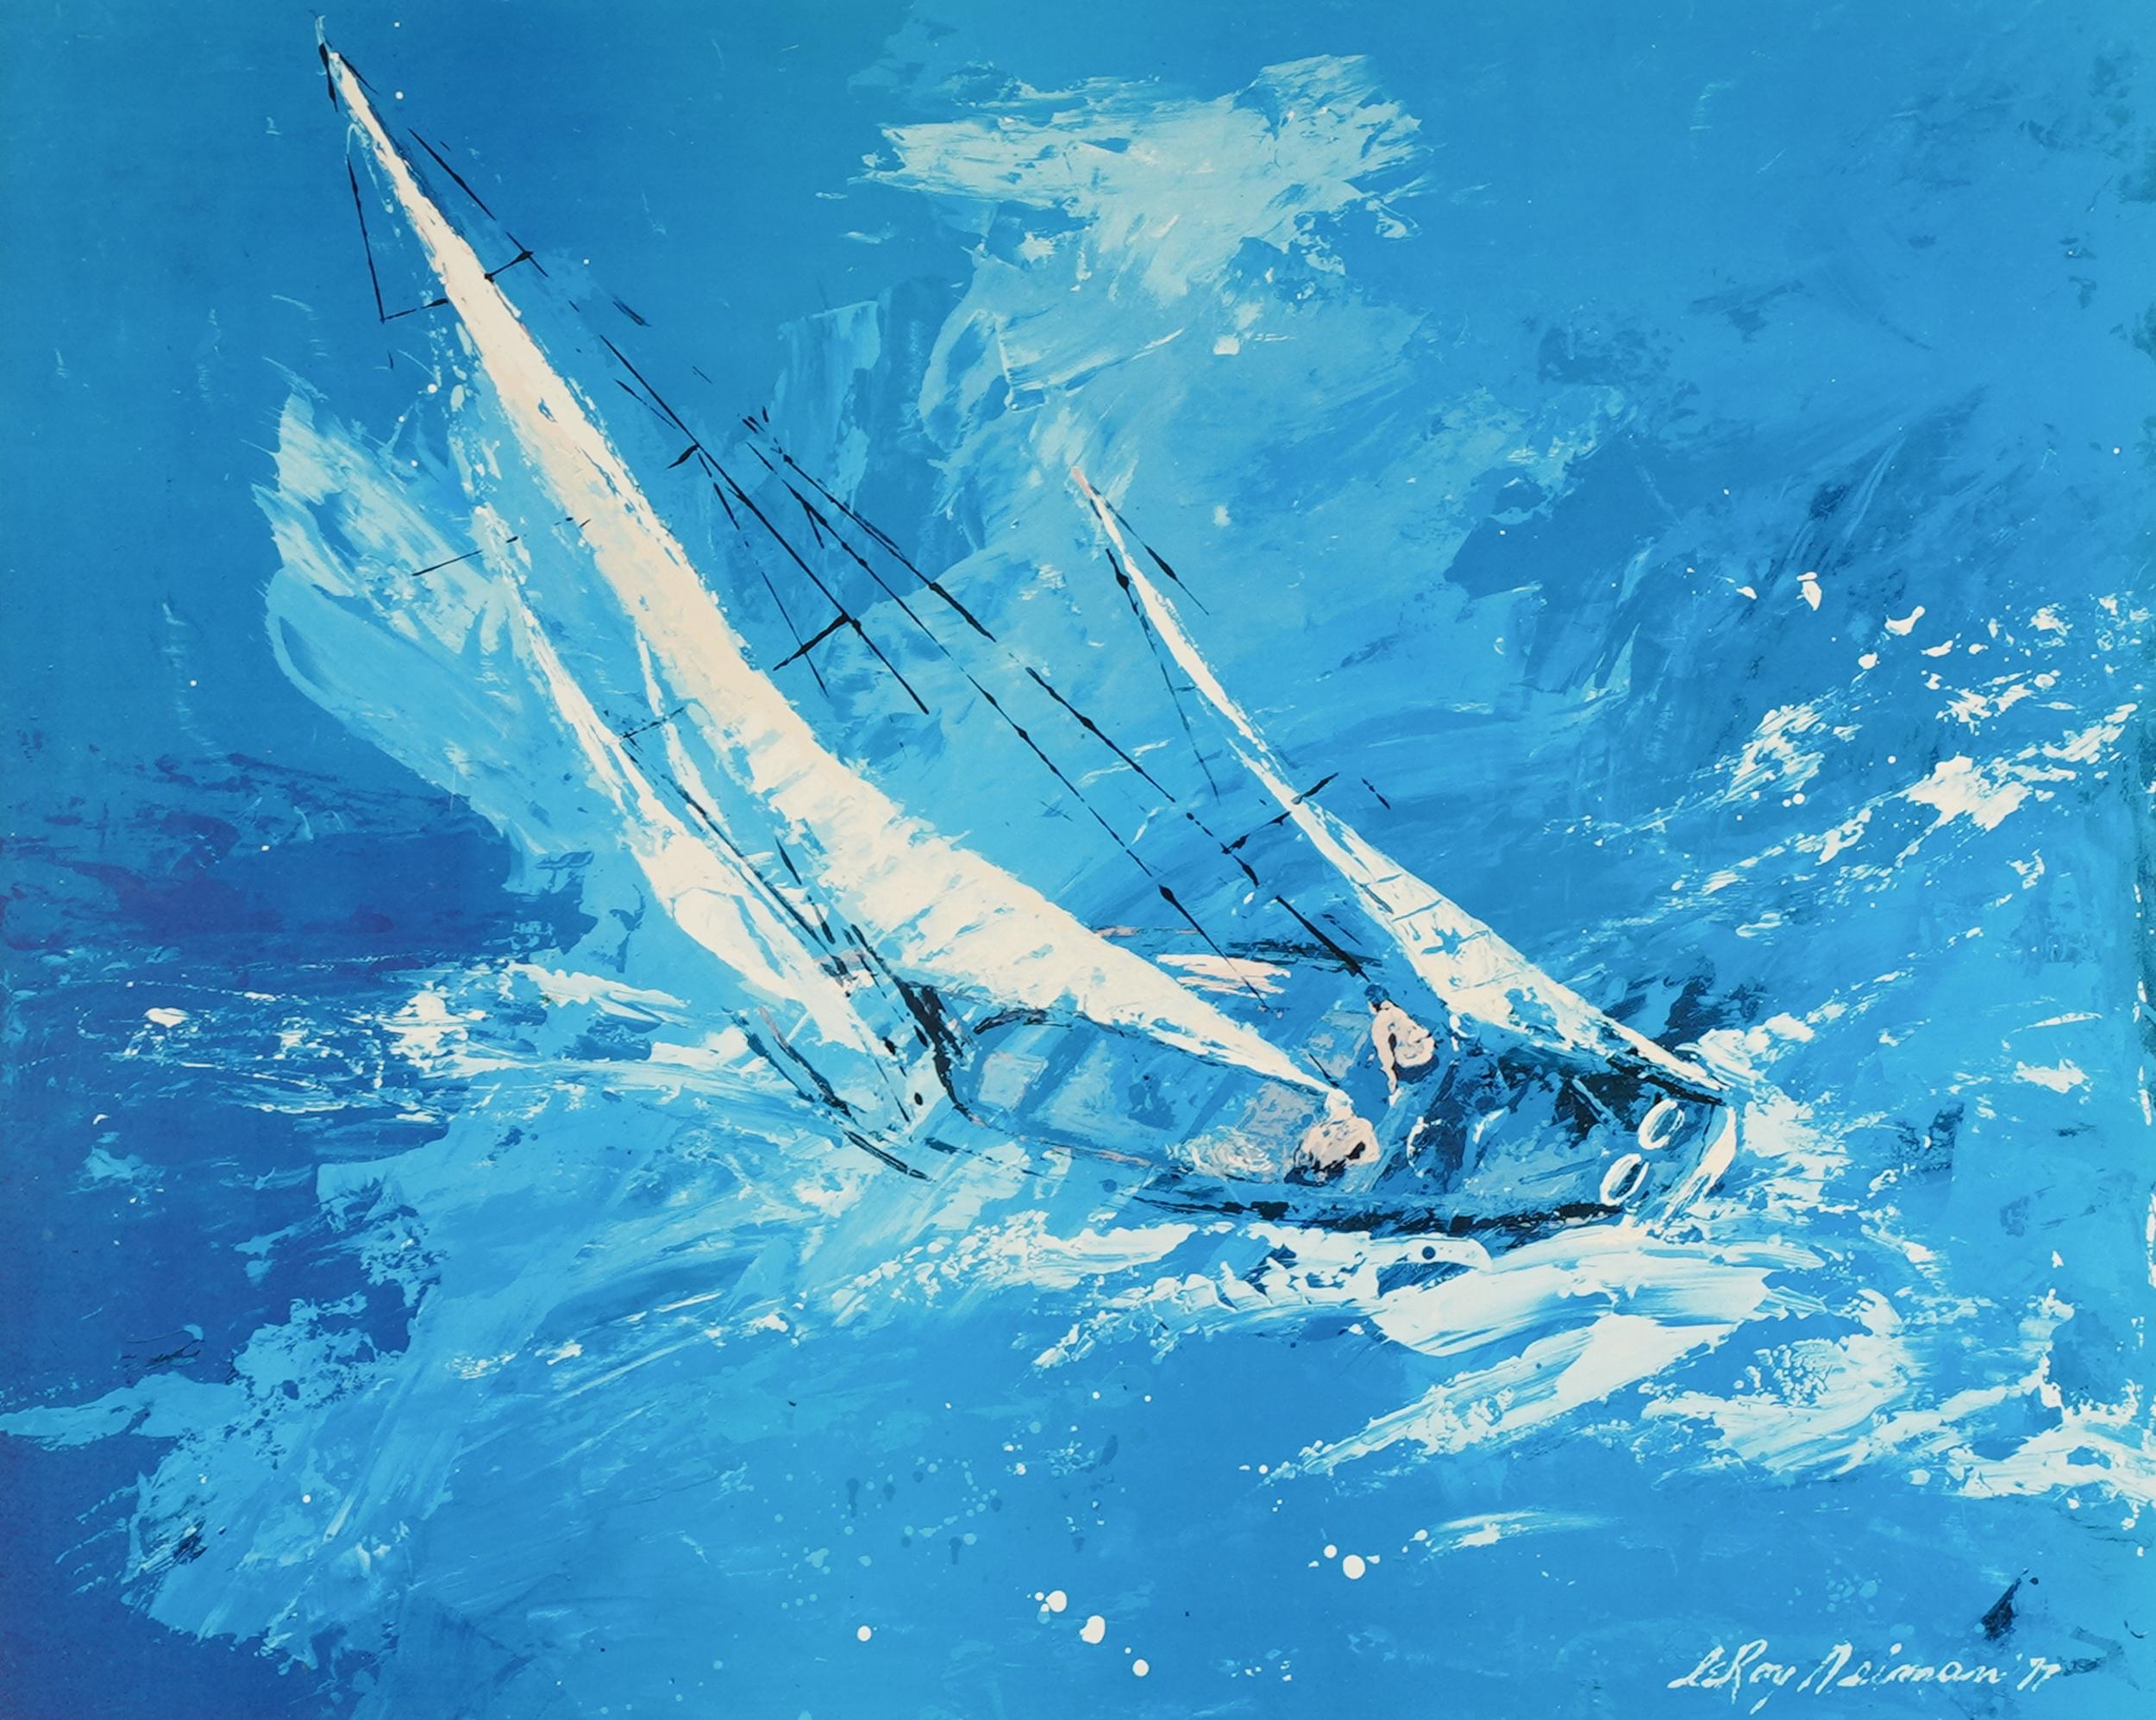 SAILBOAT by LeRoy Neiman, 77